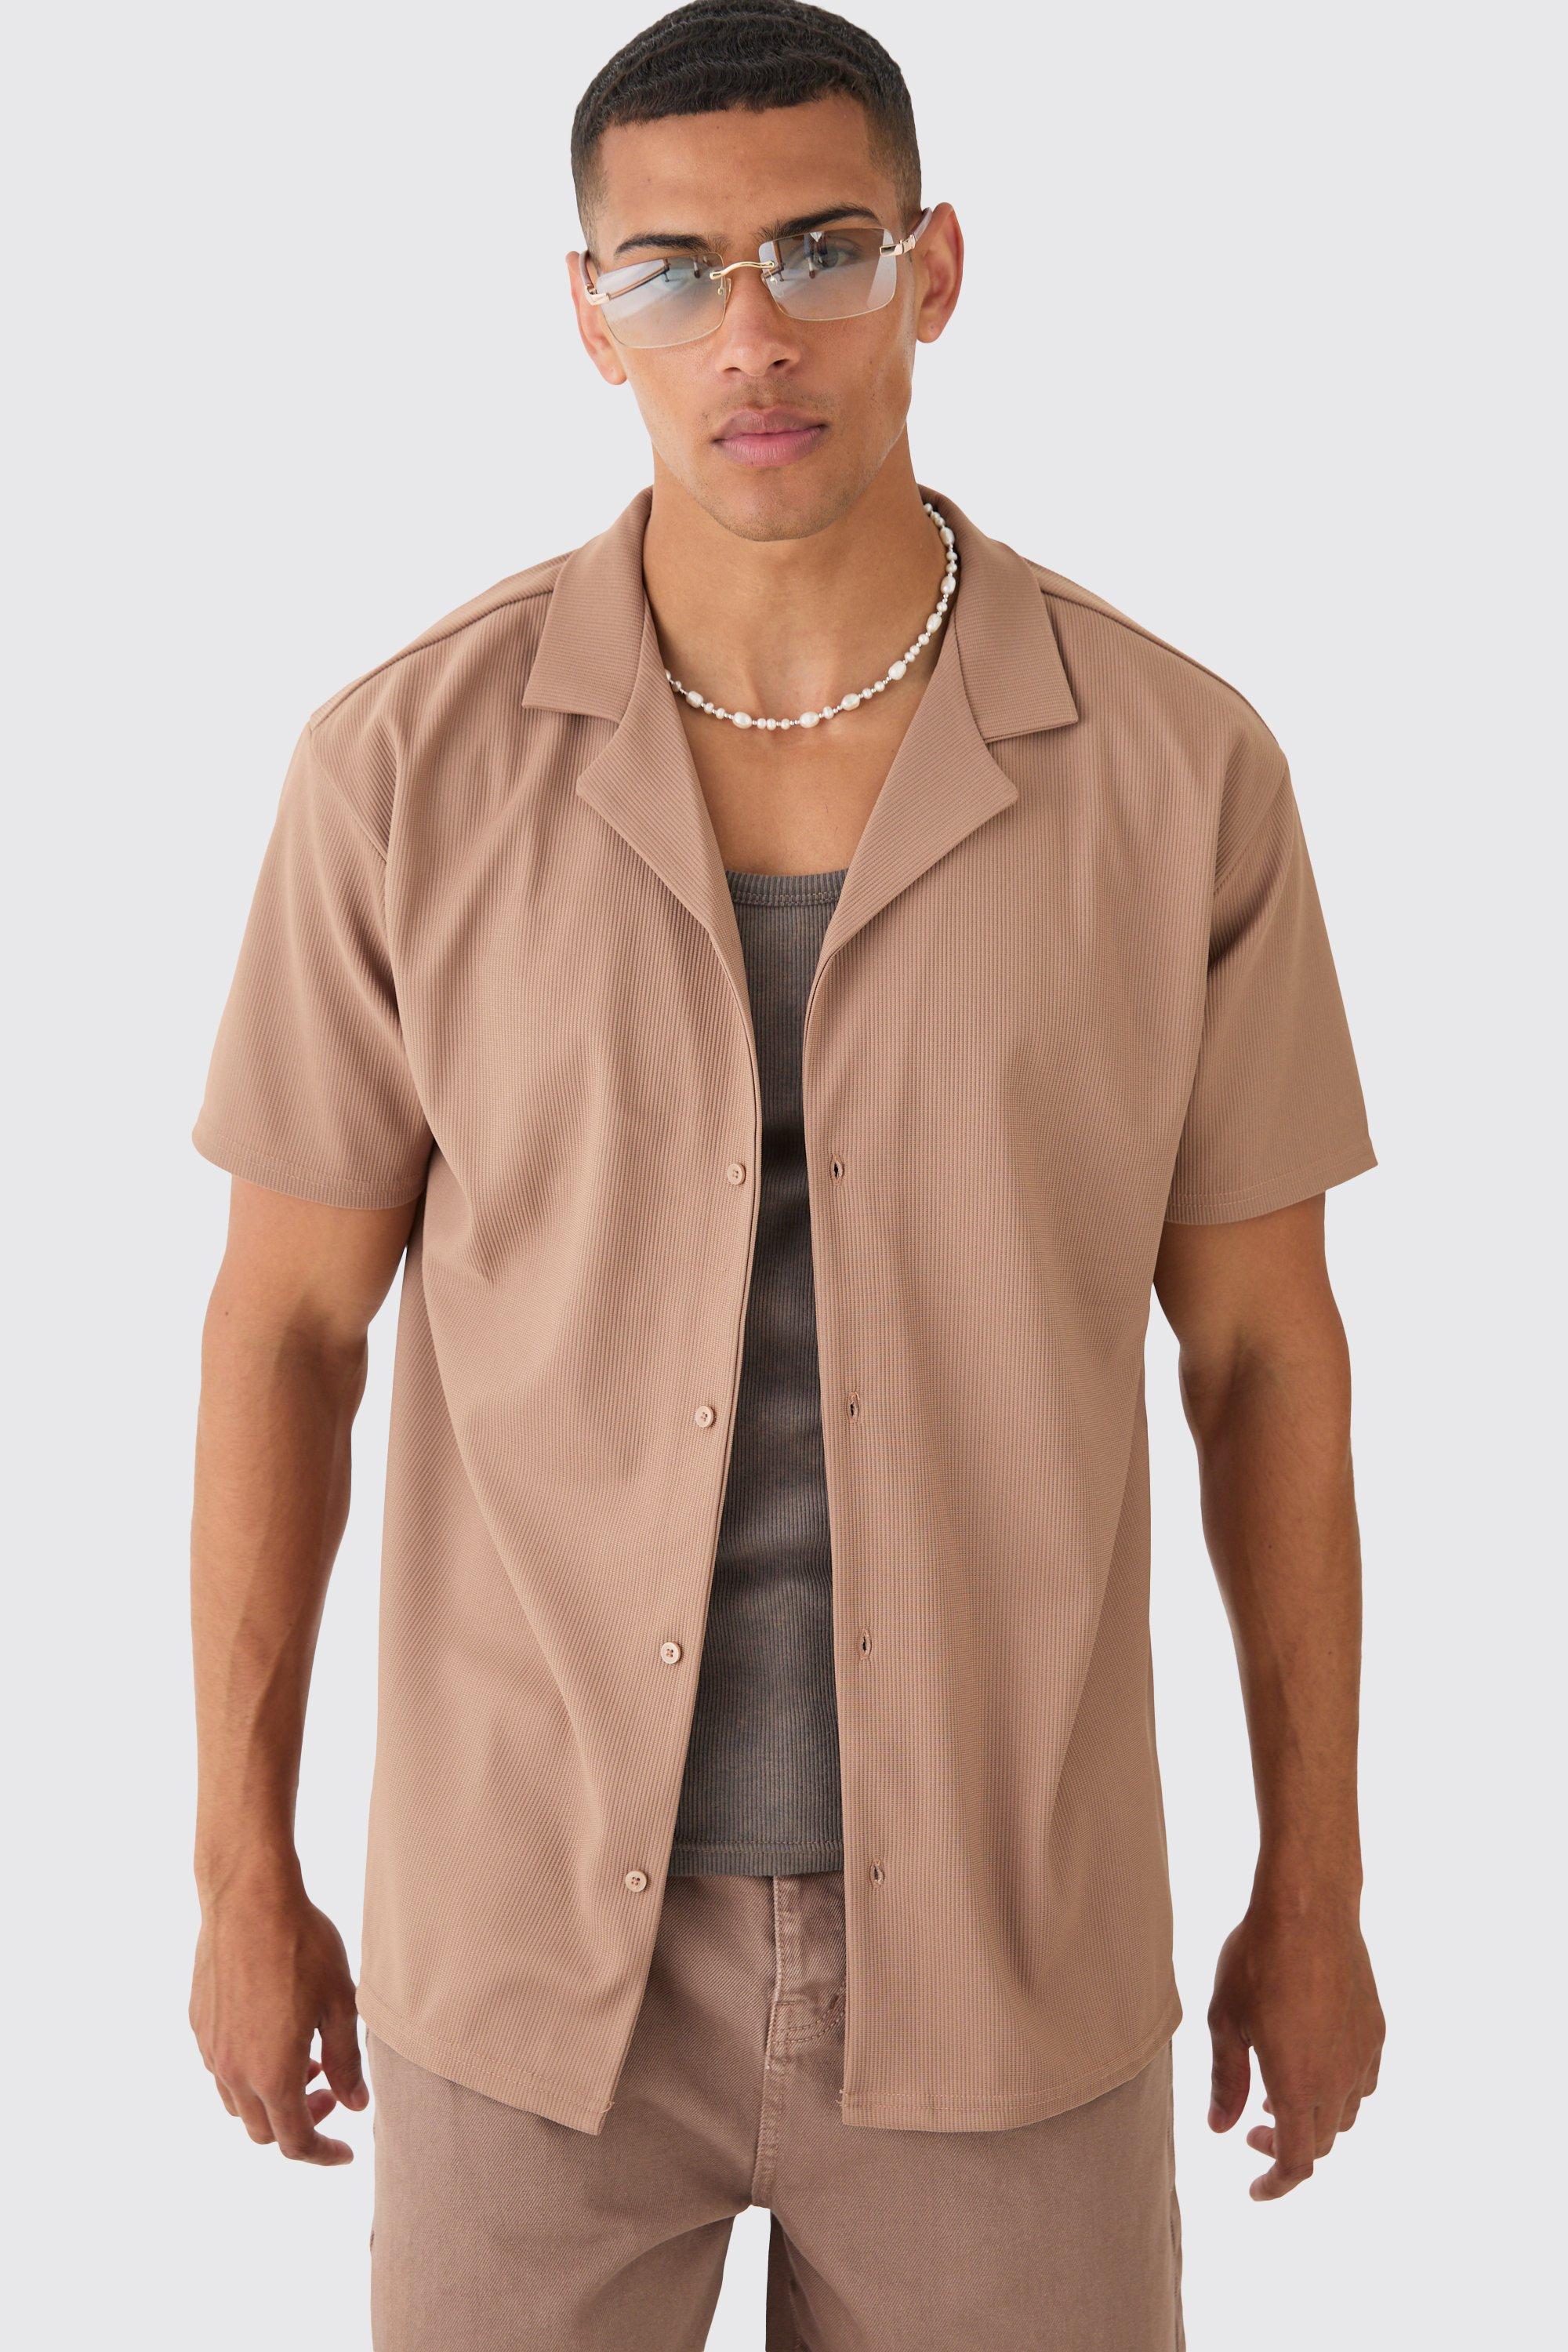 boohooman Mens Short Sleeve Ribbed Oversized Shirt - Taupe - M, Taupe